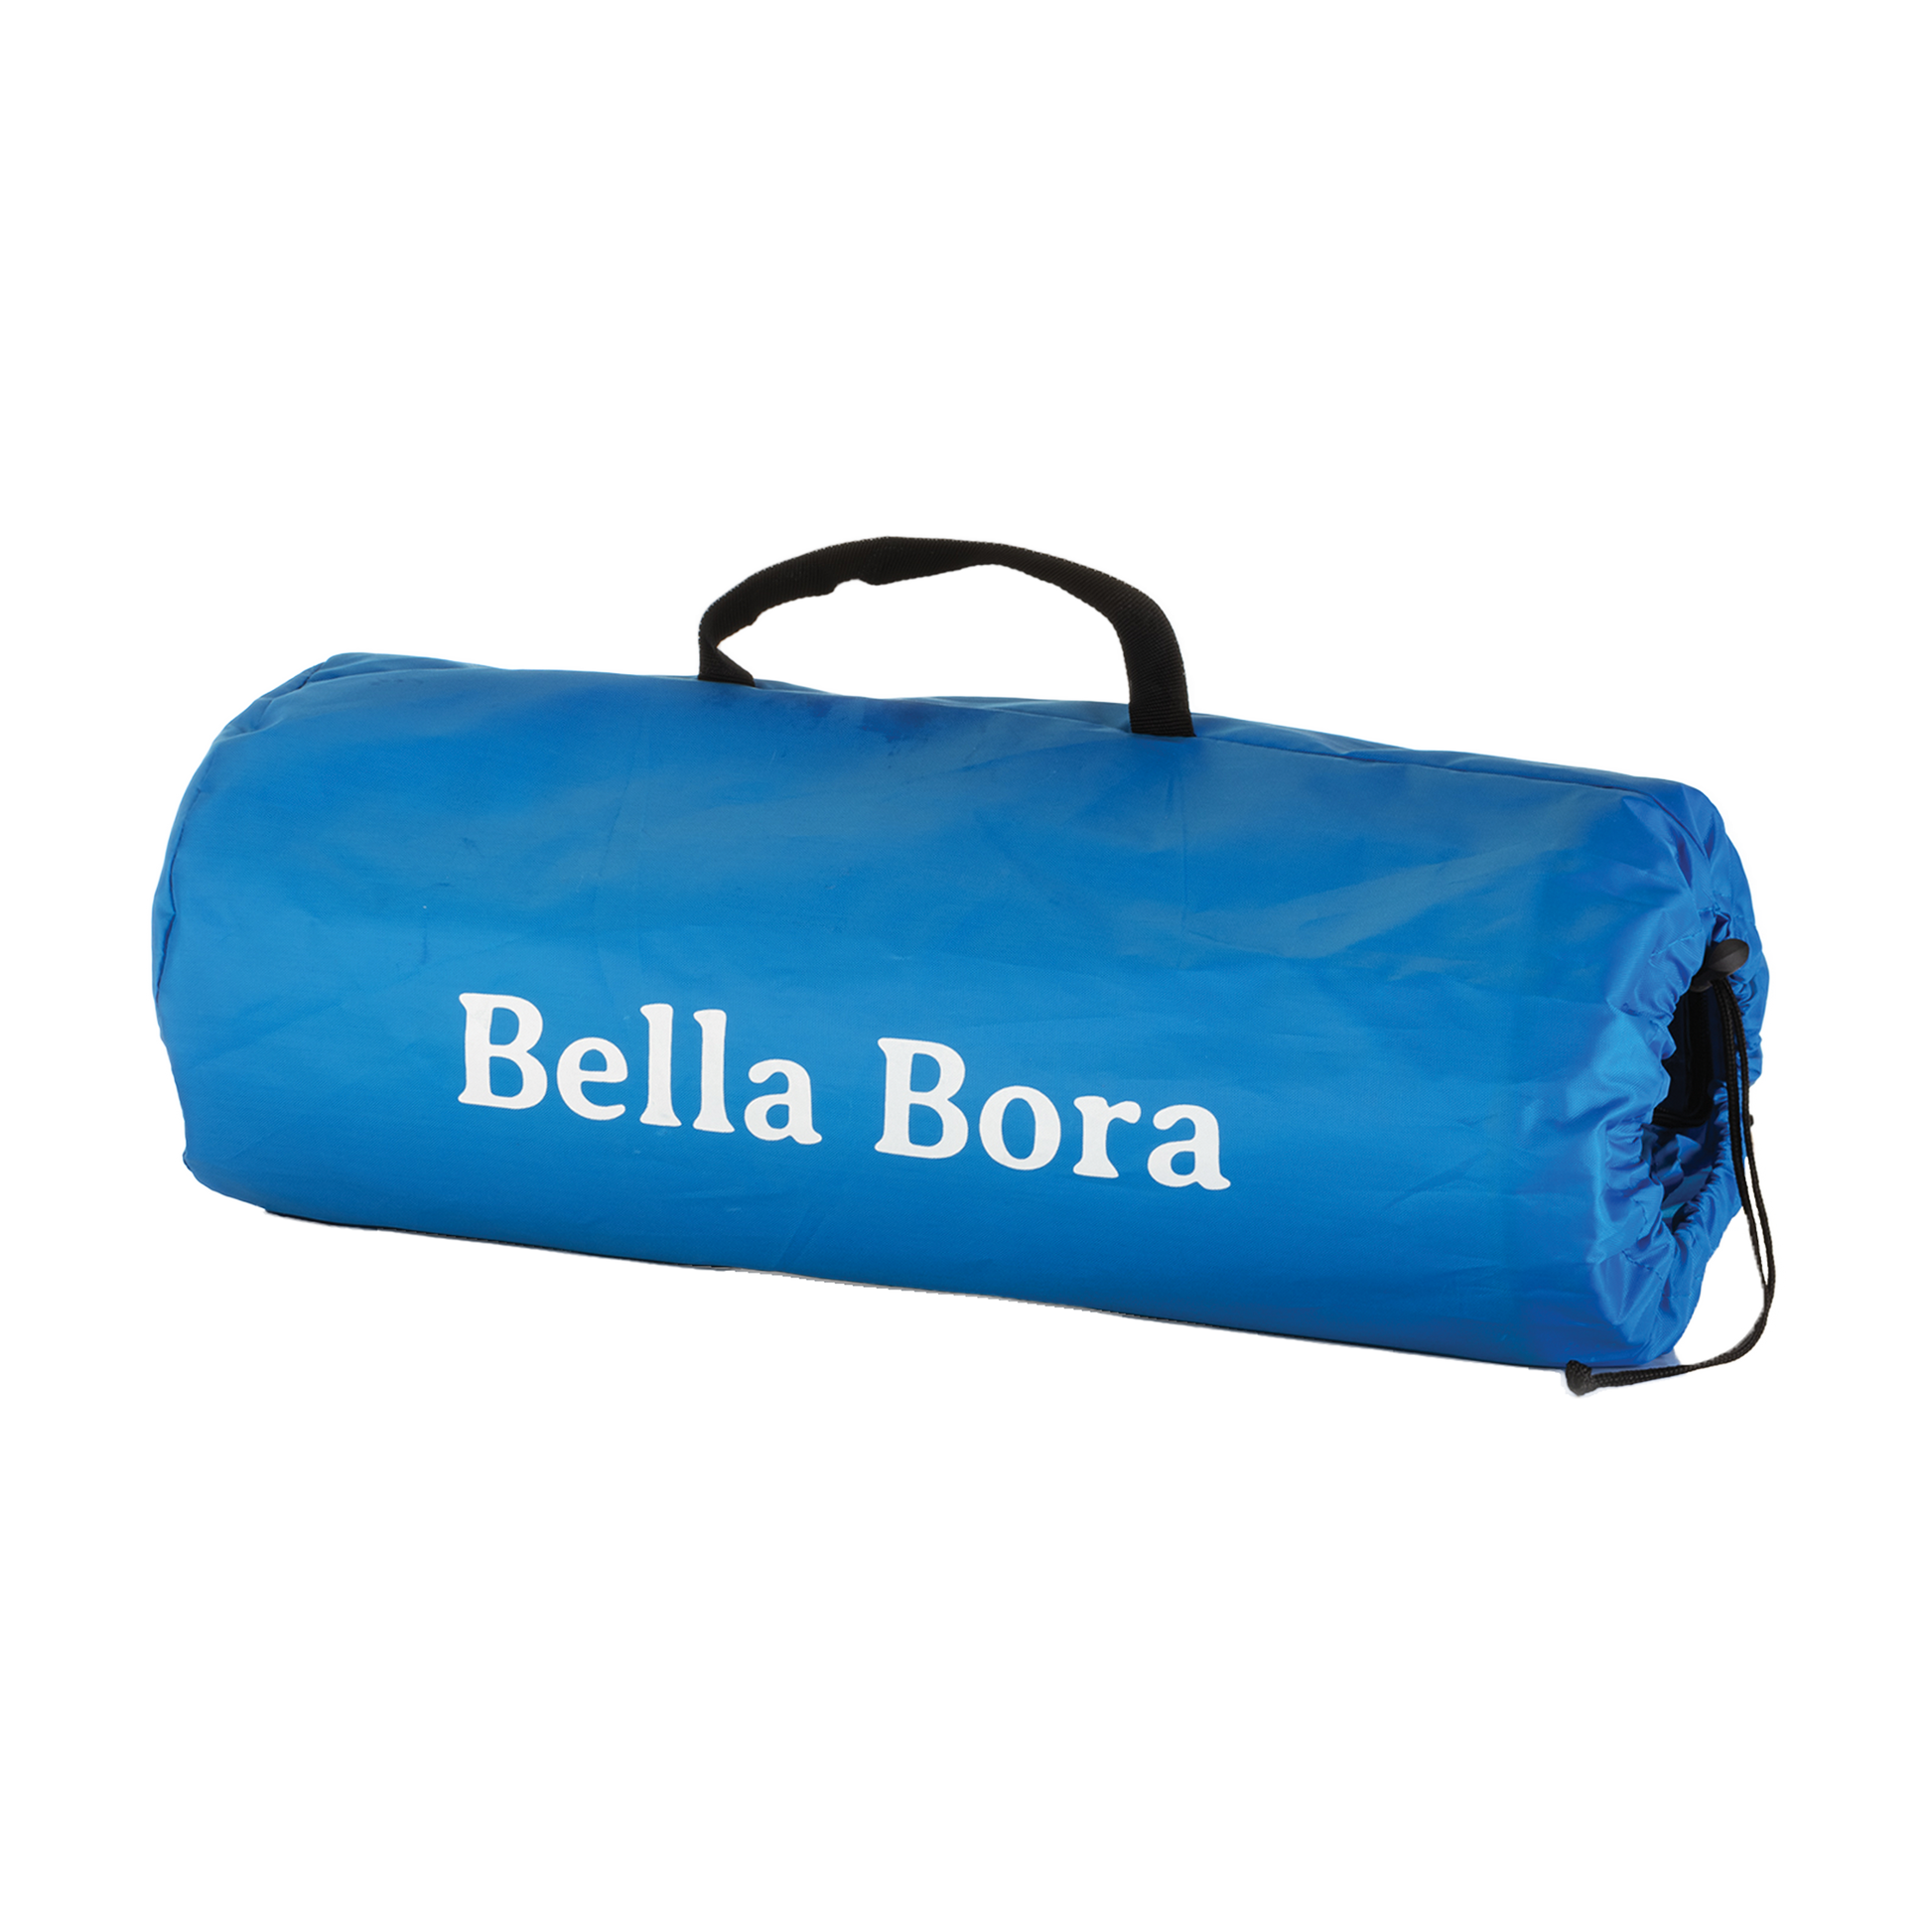 Close-up of the portable blue carrying case for the Bella Bora Still Air Box, featuring the white Bella Bora logo on the side, against a black background.